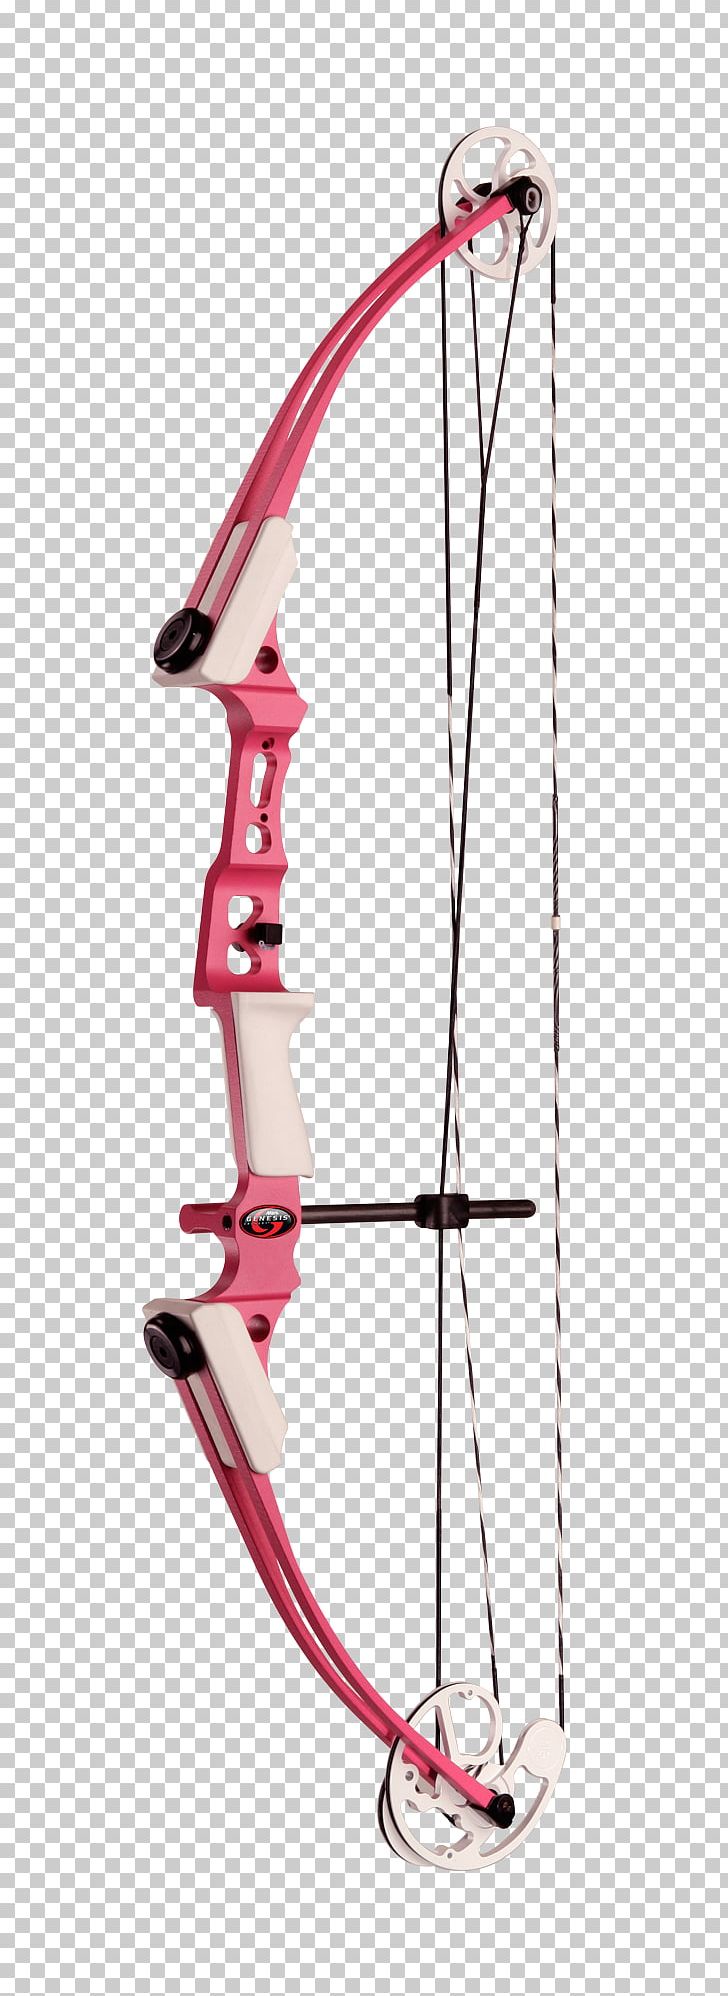 Compound Bows Bow And Arrow Archery Hunting PNG, Clipart, Archery, Arrow, Bow And Arrow, Bowhunting, Compound Bows Free PNG Download